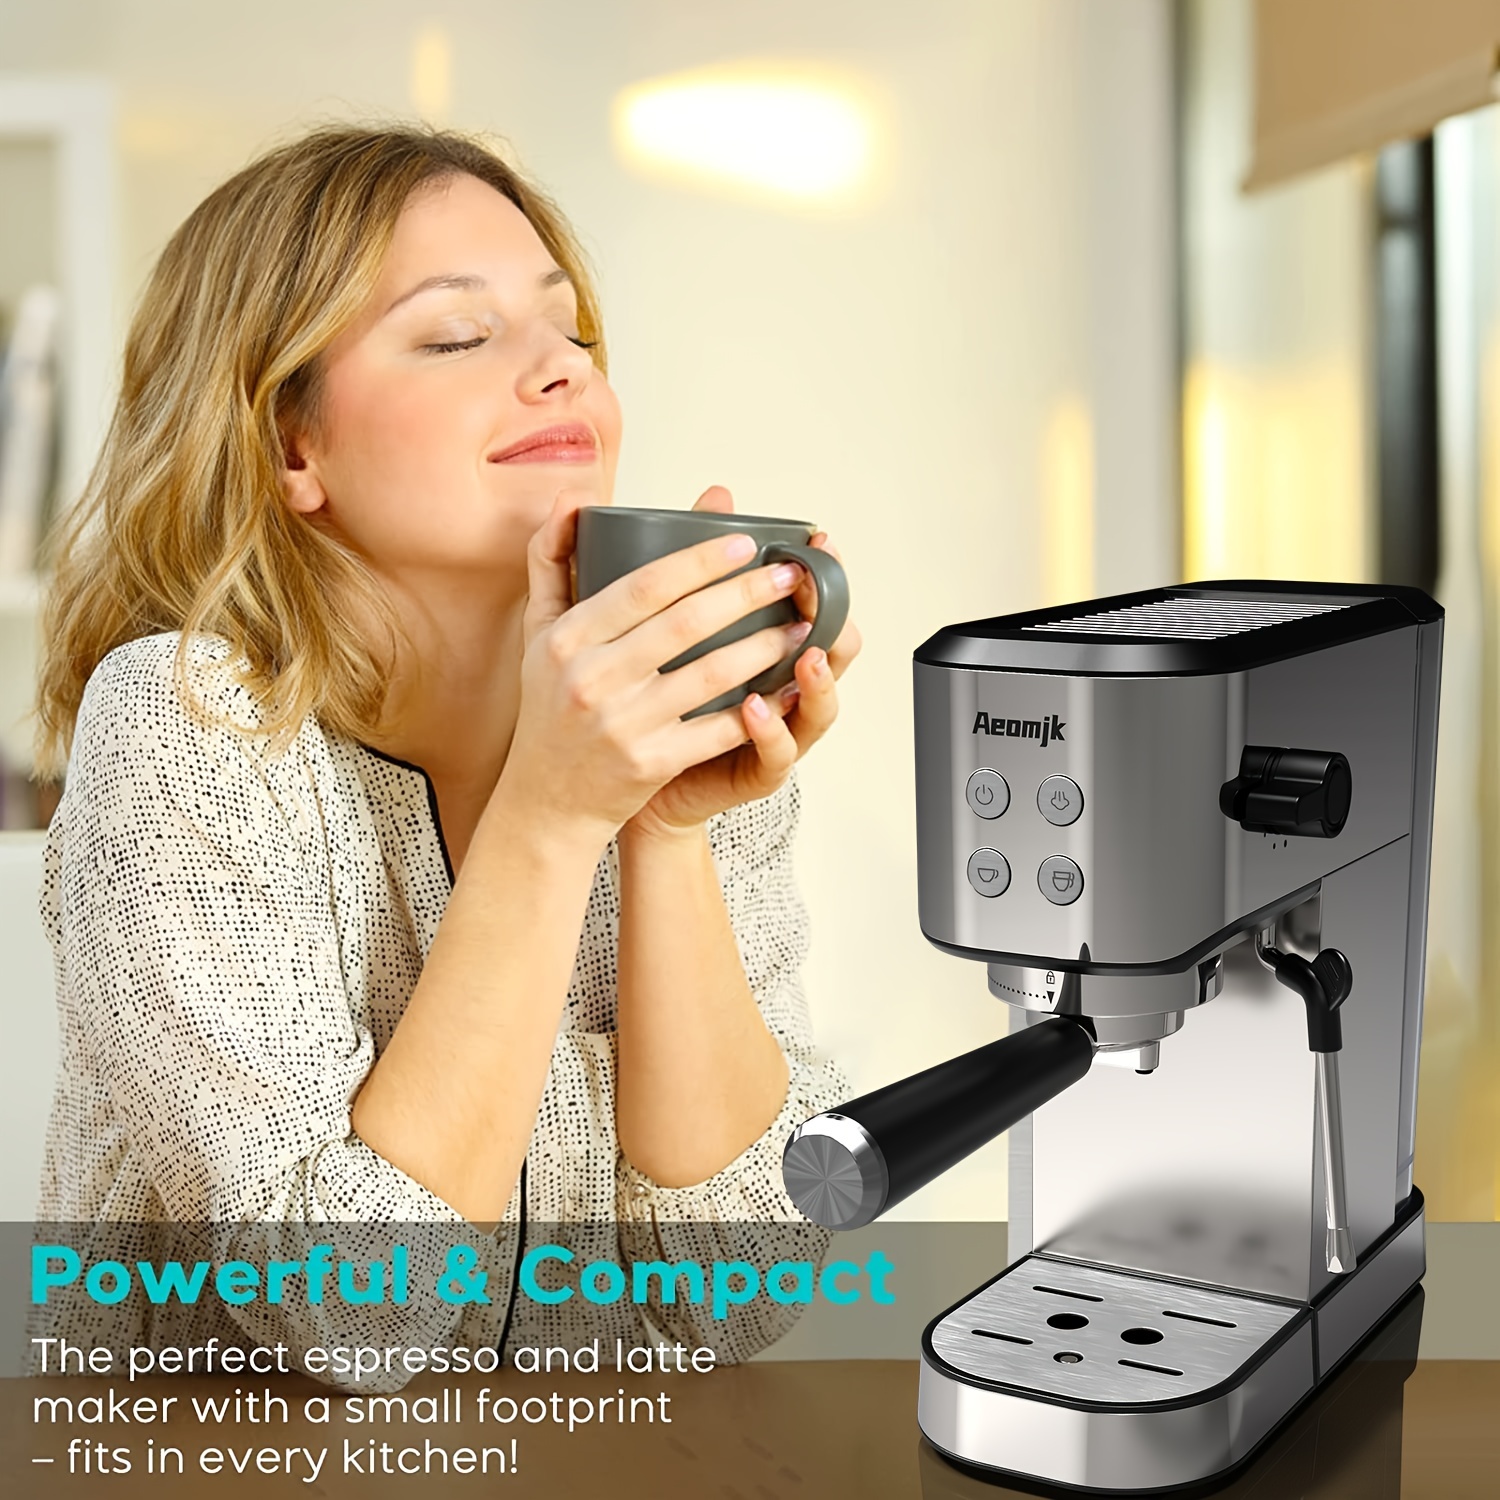 ICUIRE Espresso Machine, 20 Bar Compact Steam Espresso Coffee Machine with  Milk Frother, Digital Touch Panel, 37 Oz Removable Water Tank for Espresso